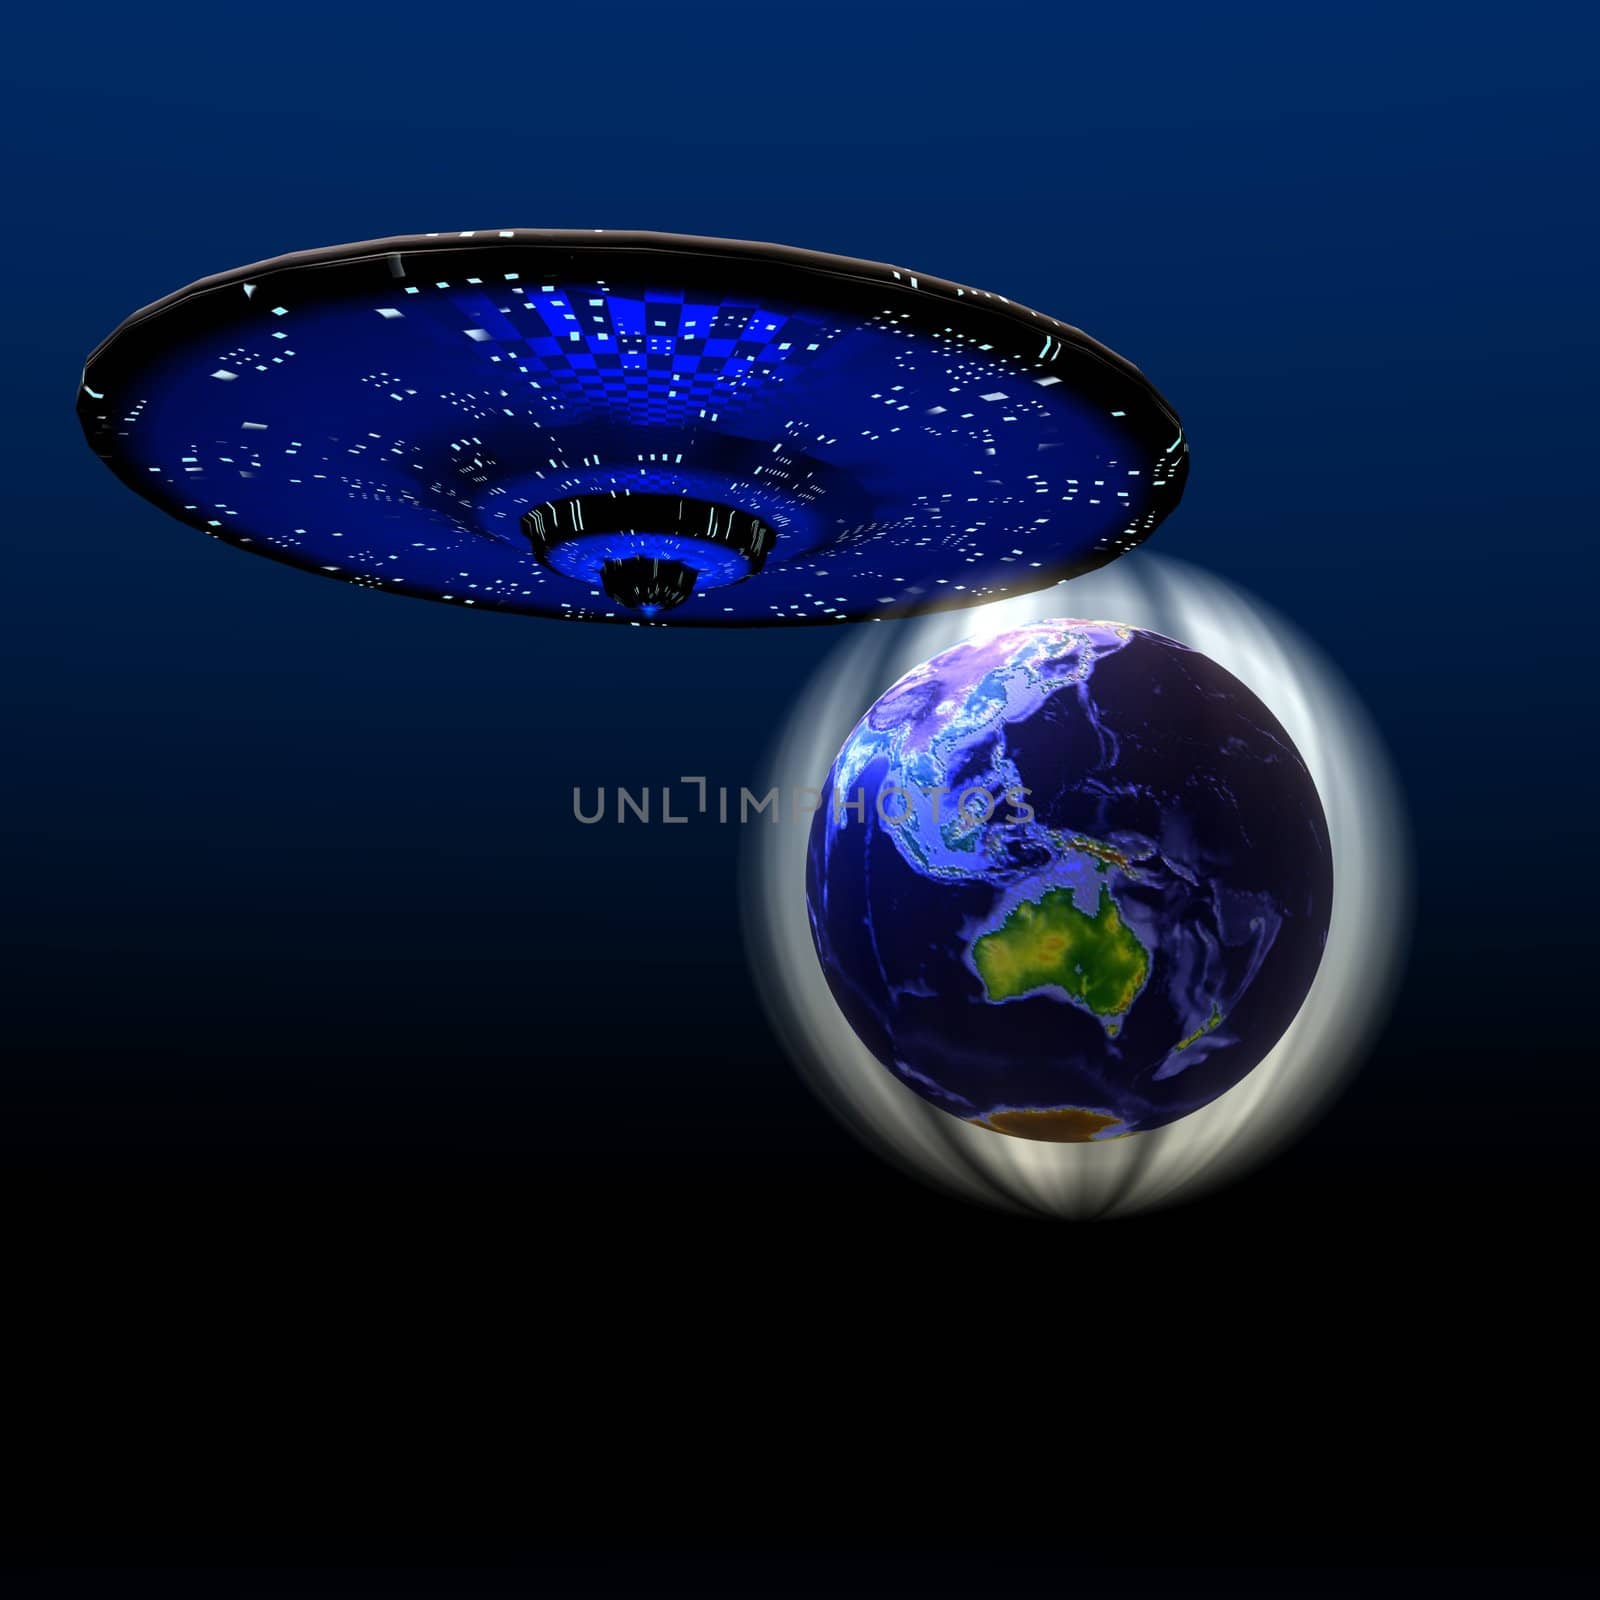 Cosmic image of a flying saucer and the magnetic force field protecting the Earth.